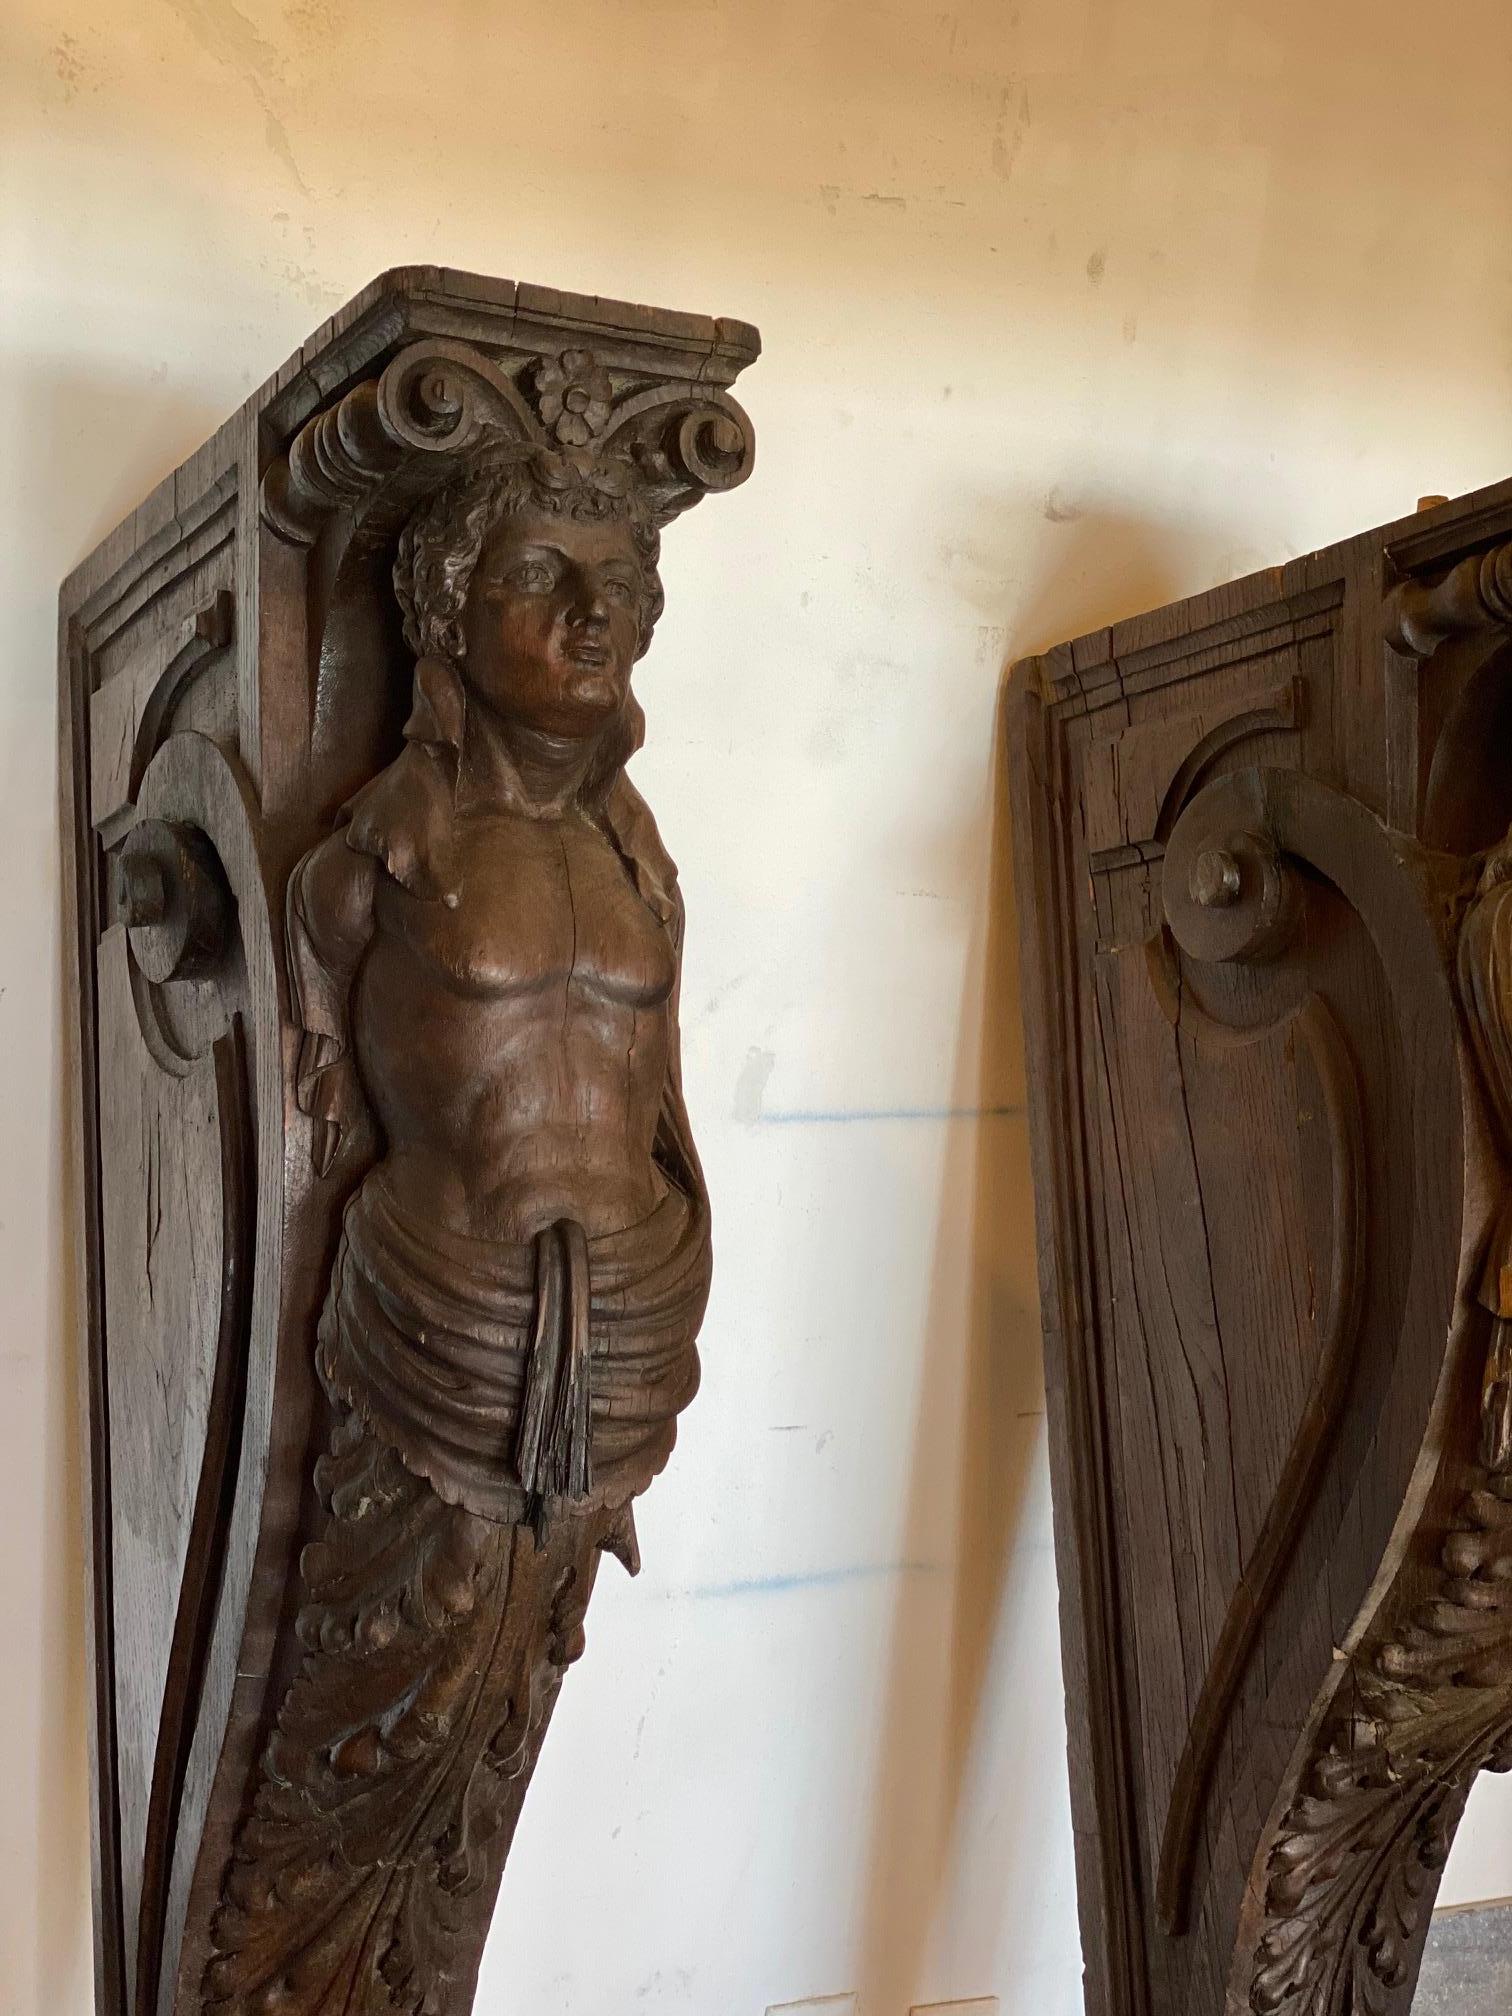 This pair of caryatid are made of oak and date back to the 1700s, France.

Measurements: 19” D x 7” W x 55” H.